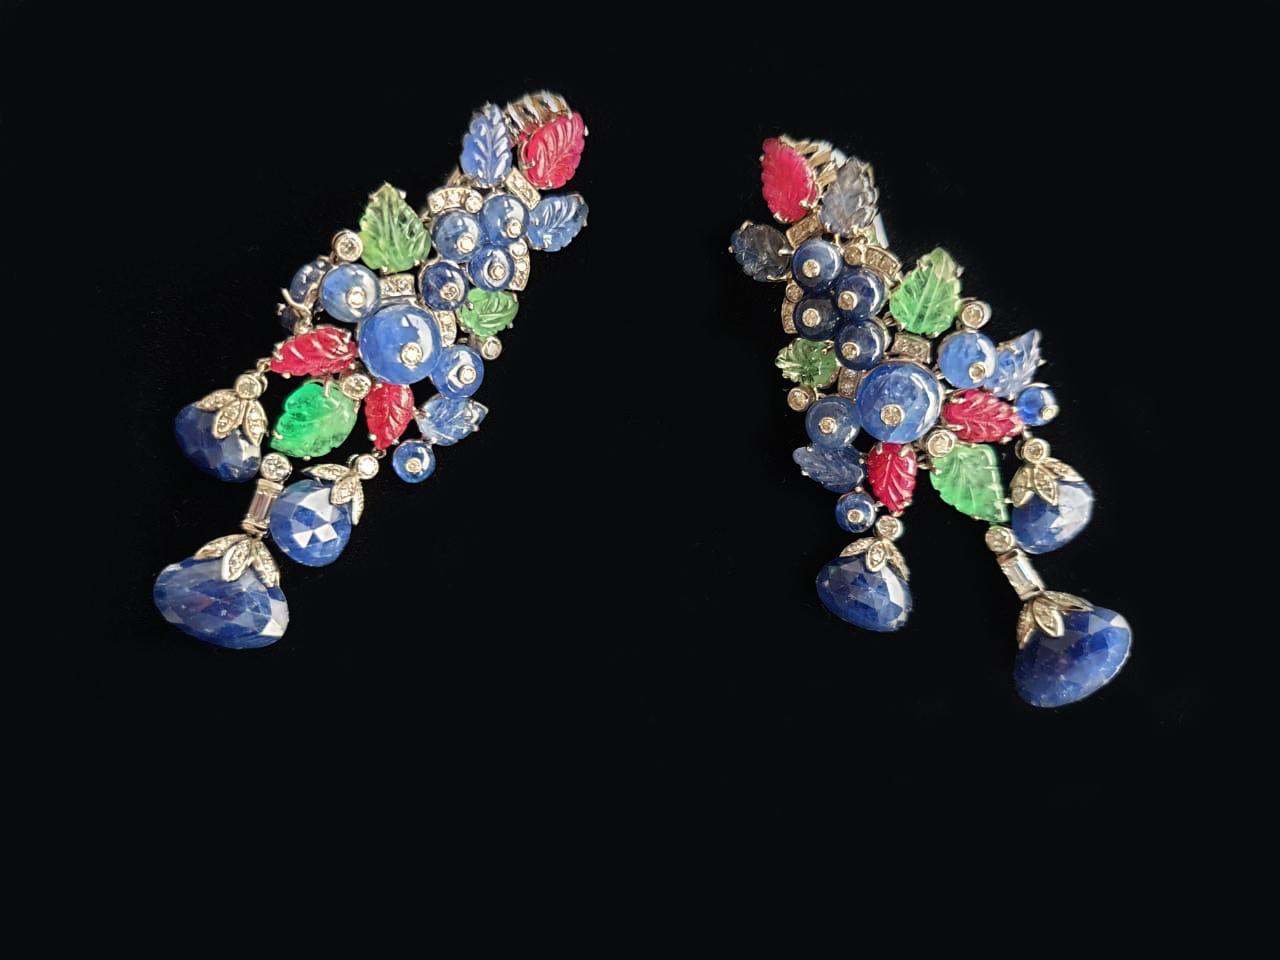 These earrings are a stunning piece of jewelry made from 18k white gold and adorned with diamonds, emeralds, rubies, and sapphires. The carved leaf designs in the gemstones add a touch of elegance and nature-inspired beauty to the overall design.